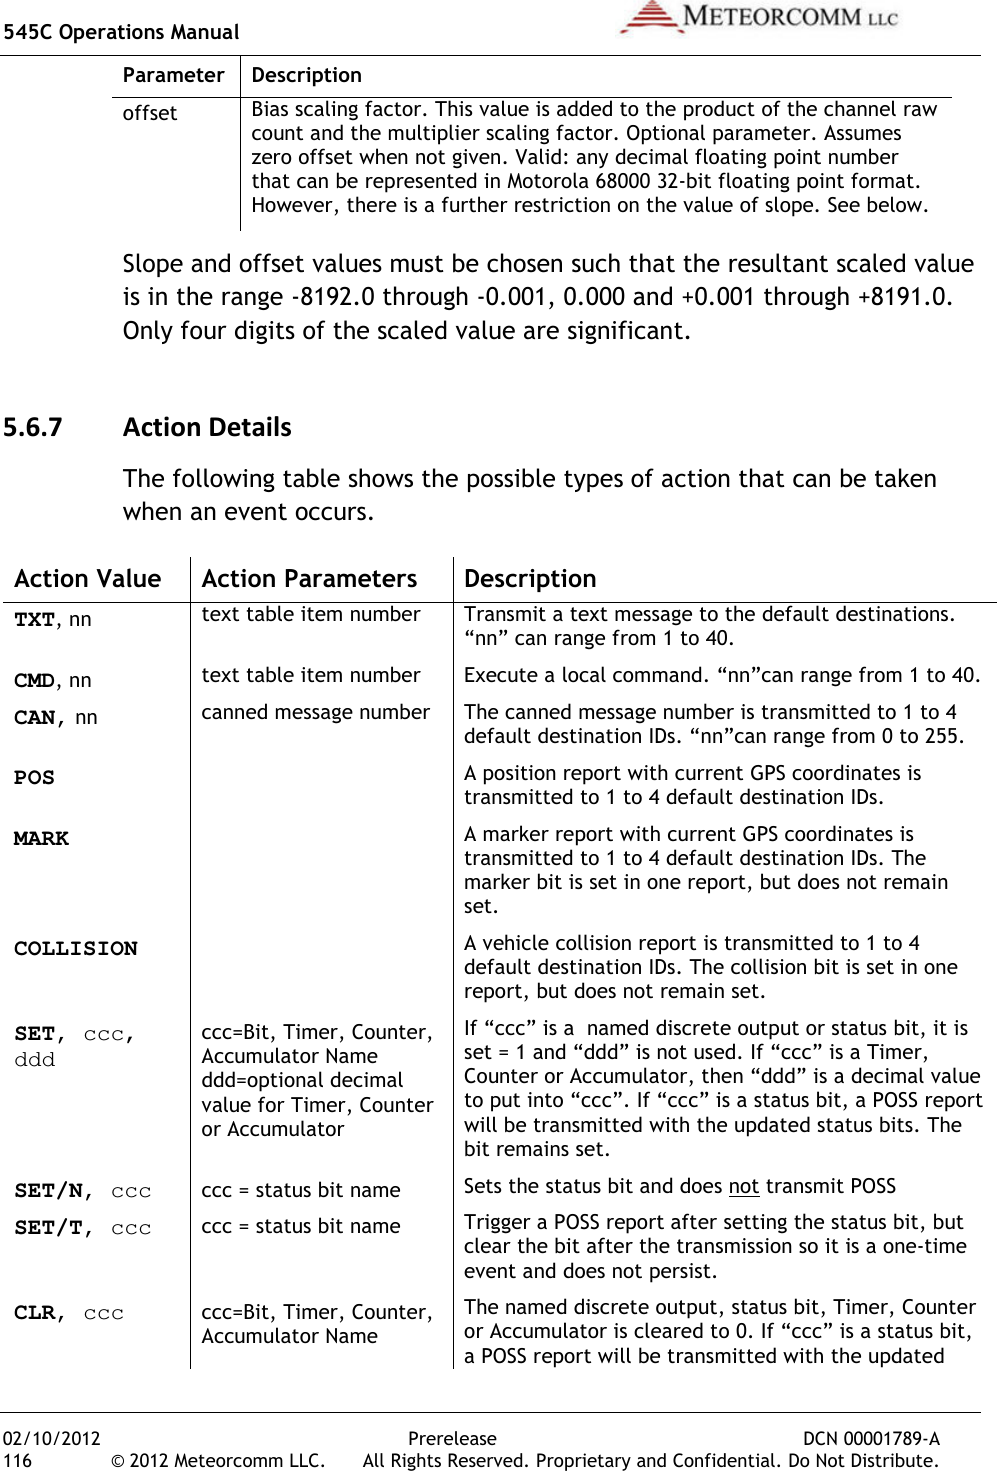 545C Operations Manual   02/10/2012  Prerelease  DCN 00001789-A 116  © 2012 Meteorcomm LLC.   All Rights Reserved. Proprietary and Confidential. Do Not Distribute. Parameter  Description offset Bias scaling factor. This value is added to the product of the channel raw count and the multiplier scaling factor. Optional parameter. Assumes zero offset when not given. Valid: any decimal floating point number that can be represented in Motorola 68000 32-bit floating point format. However, there is a further restriction on the value of slope. See below. Slope and offset values must be chosen such that the resultant scaled value is in the range -8192.0 through -0.001, 0.000 and +0.001 through +8191.0. Only four digits of the scaled value are significant. 5.6.7 Action Details The following table shows the possible types of action that can be taken when an event occurs. Action Value  Action Parameters  Description TXT, nn text table item number Transmit a text message to the default destinations. “nn” can range from 1 to 40. CMD, nn text table item number Execute a local command. “nn”can range from 1 to 40. CAN, nn canned message number The canned message number is transmitted to 1 to 4 default destination IDs. “nn”can range from 0 to 255. POS  A position report with current GPS coordinates is transmitted to 1 to 4 default destination IDs. MARK  A marker report with current GPS coordinates is transmitted to 1 to 4 default destination IDs. The marker bit is set in one report, but does not remain set. COLLISION  A vehicle collision report is transmitted to 1 to 4 default destination IDs. The collision bit is set in one report, but does not remain set. SET, ccc, ddd ccc=Bit, Timer, Counter, Accumulator Name  ddd=optional decimal value for Timer, Counter or Accumulator If “ccc” is a  named discrete output or status bit, it is set = 1 and “ddd” is not used. If “ccc” is a Timer, Counter or Accumulator, then “ddd” is a decimal value to put into “ccc”. If “ccc” is a status bit, a POSS report will be transmitted with the updated status bits. The bit remains set. SET/N, ccc ccc = status bit name Sets the status bit and does not transmit POSS SET/T, ccc ccc = status bit name Trigger a POSS report after setting the status bit, but clear the bit after the transmission so it is a one-time event and does not persist. CLR, ccc ccc=Bit, Timer, Counter, Accumulator Name The named discrete output, status bit, Timer, Counter or Accumulator is cleared to 0. If “ccc” is a status bit, a POSS report will be transmitted with the updated 